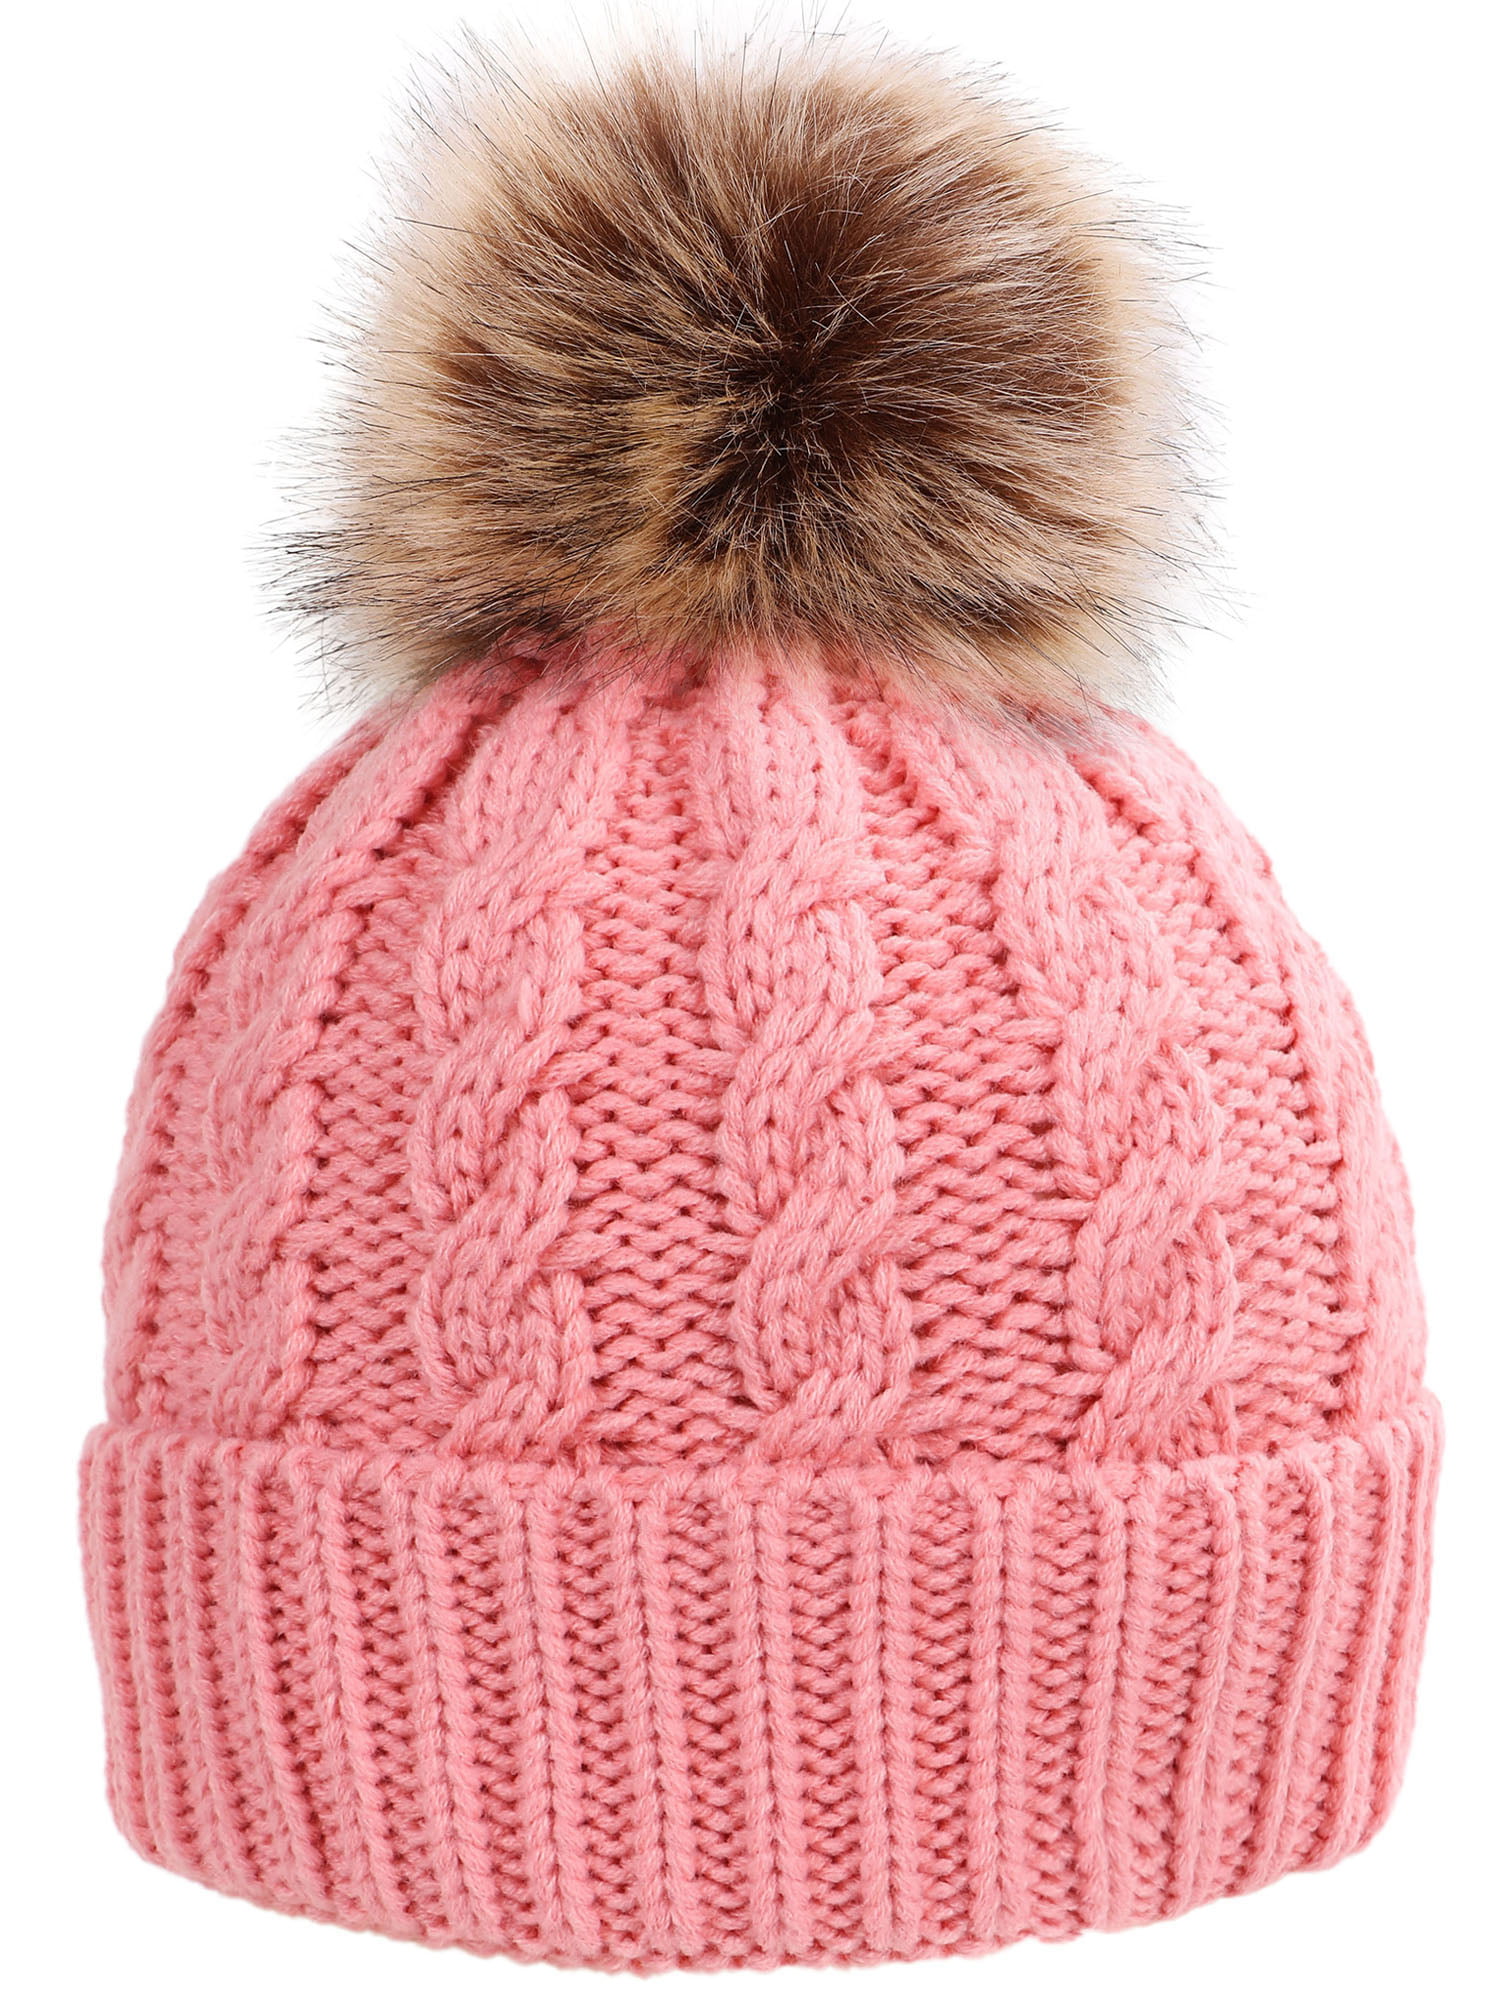 New Hand Knitted Adult Beanie Hat with Faux Fur Bobble 